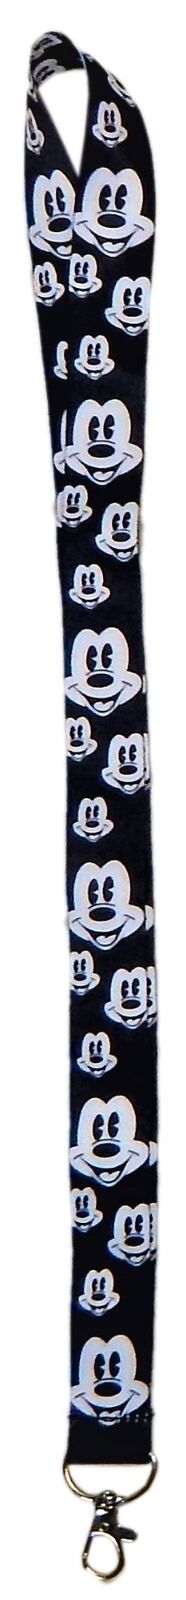 Disney Mickey Mouse Lanyards with Clip - ID / Badge Holder ~ Brand New Lanyard